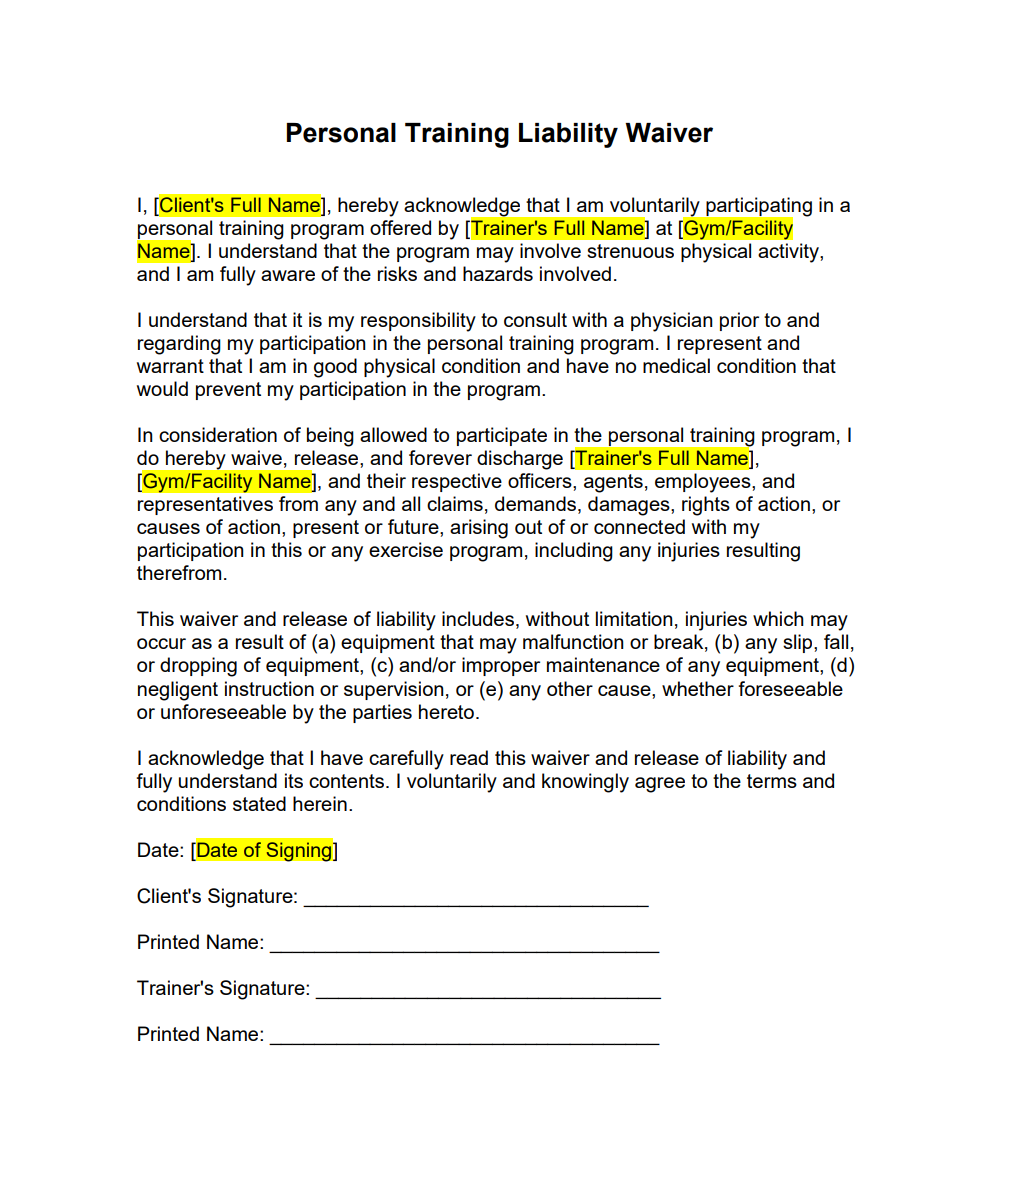 Personal Training Liability Waiver Forms Docs 2023